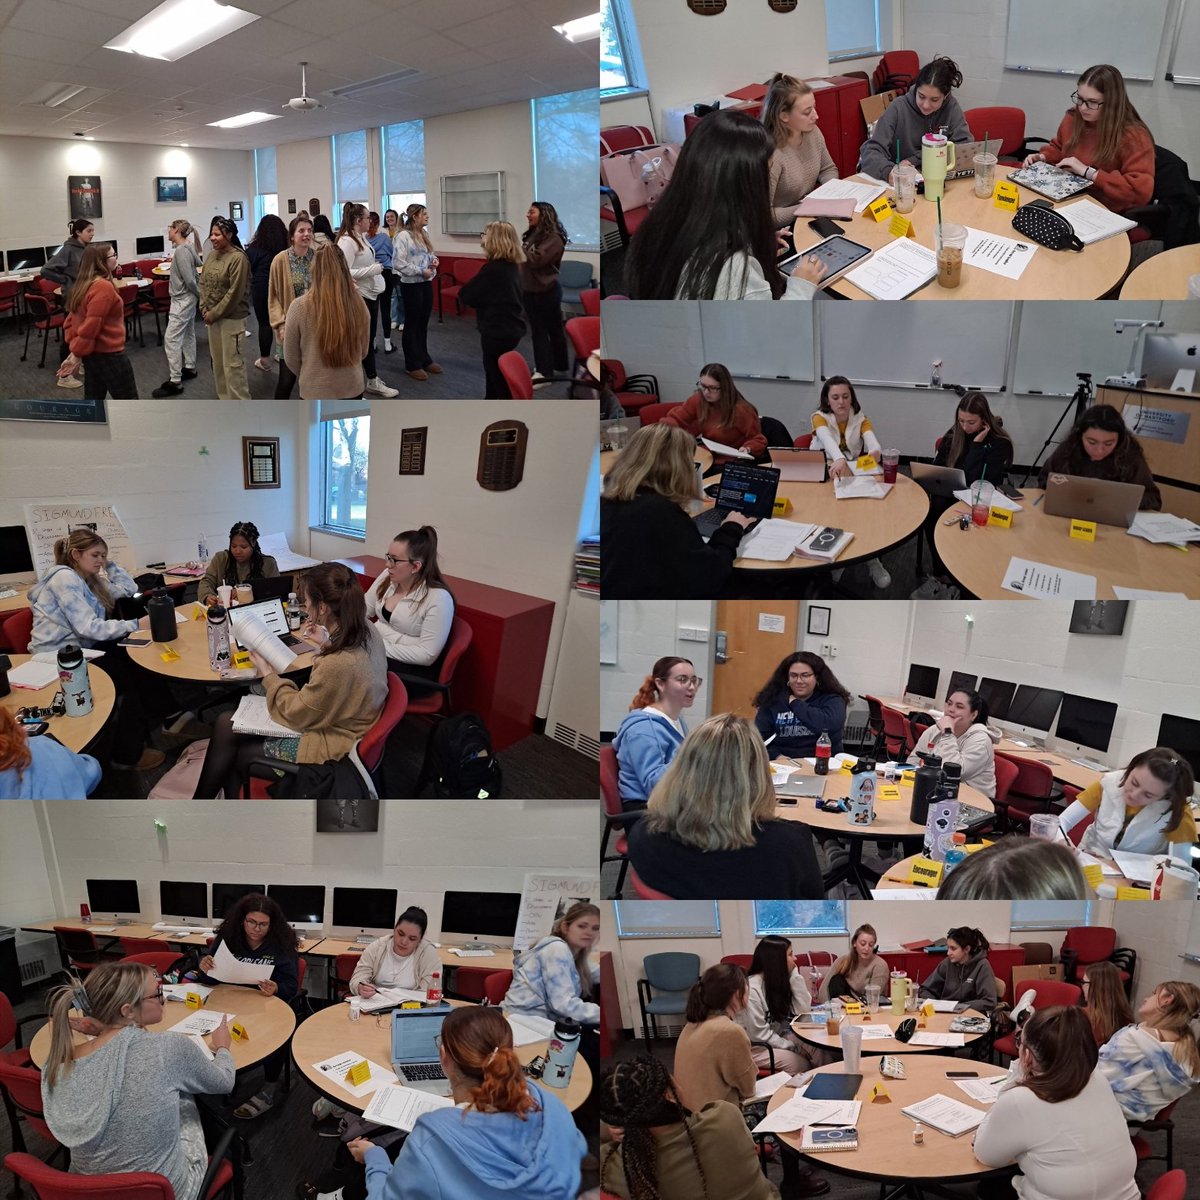 Tonight, we fully engaged in visible thinking protocols to strengthen our understanding of civic competency and the art of argumentation. I am beyond proud of my students and their commitment to teaching and learning! 😀 @UofHartford #integratedmethods #futureeducators #EDE